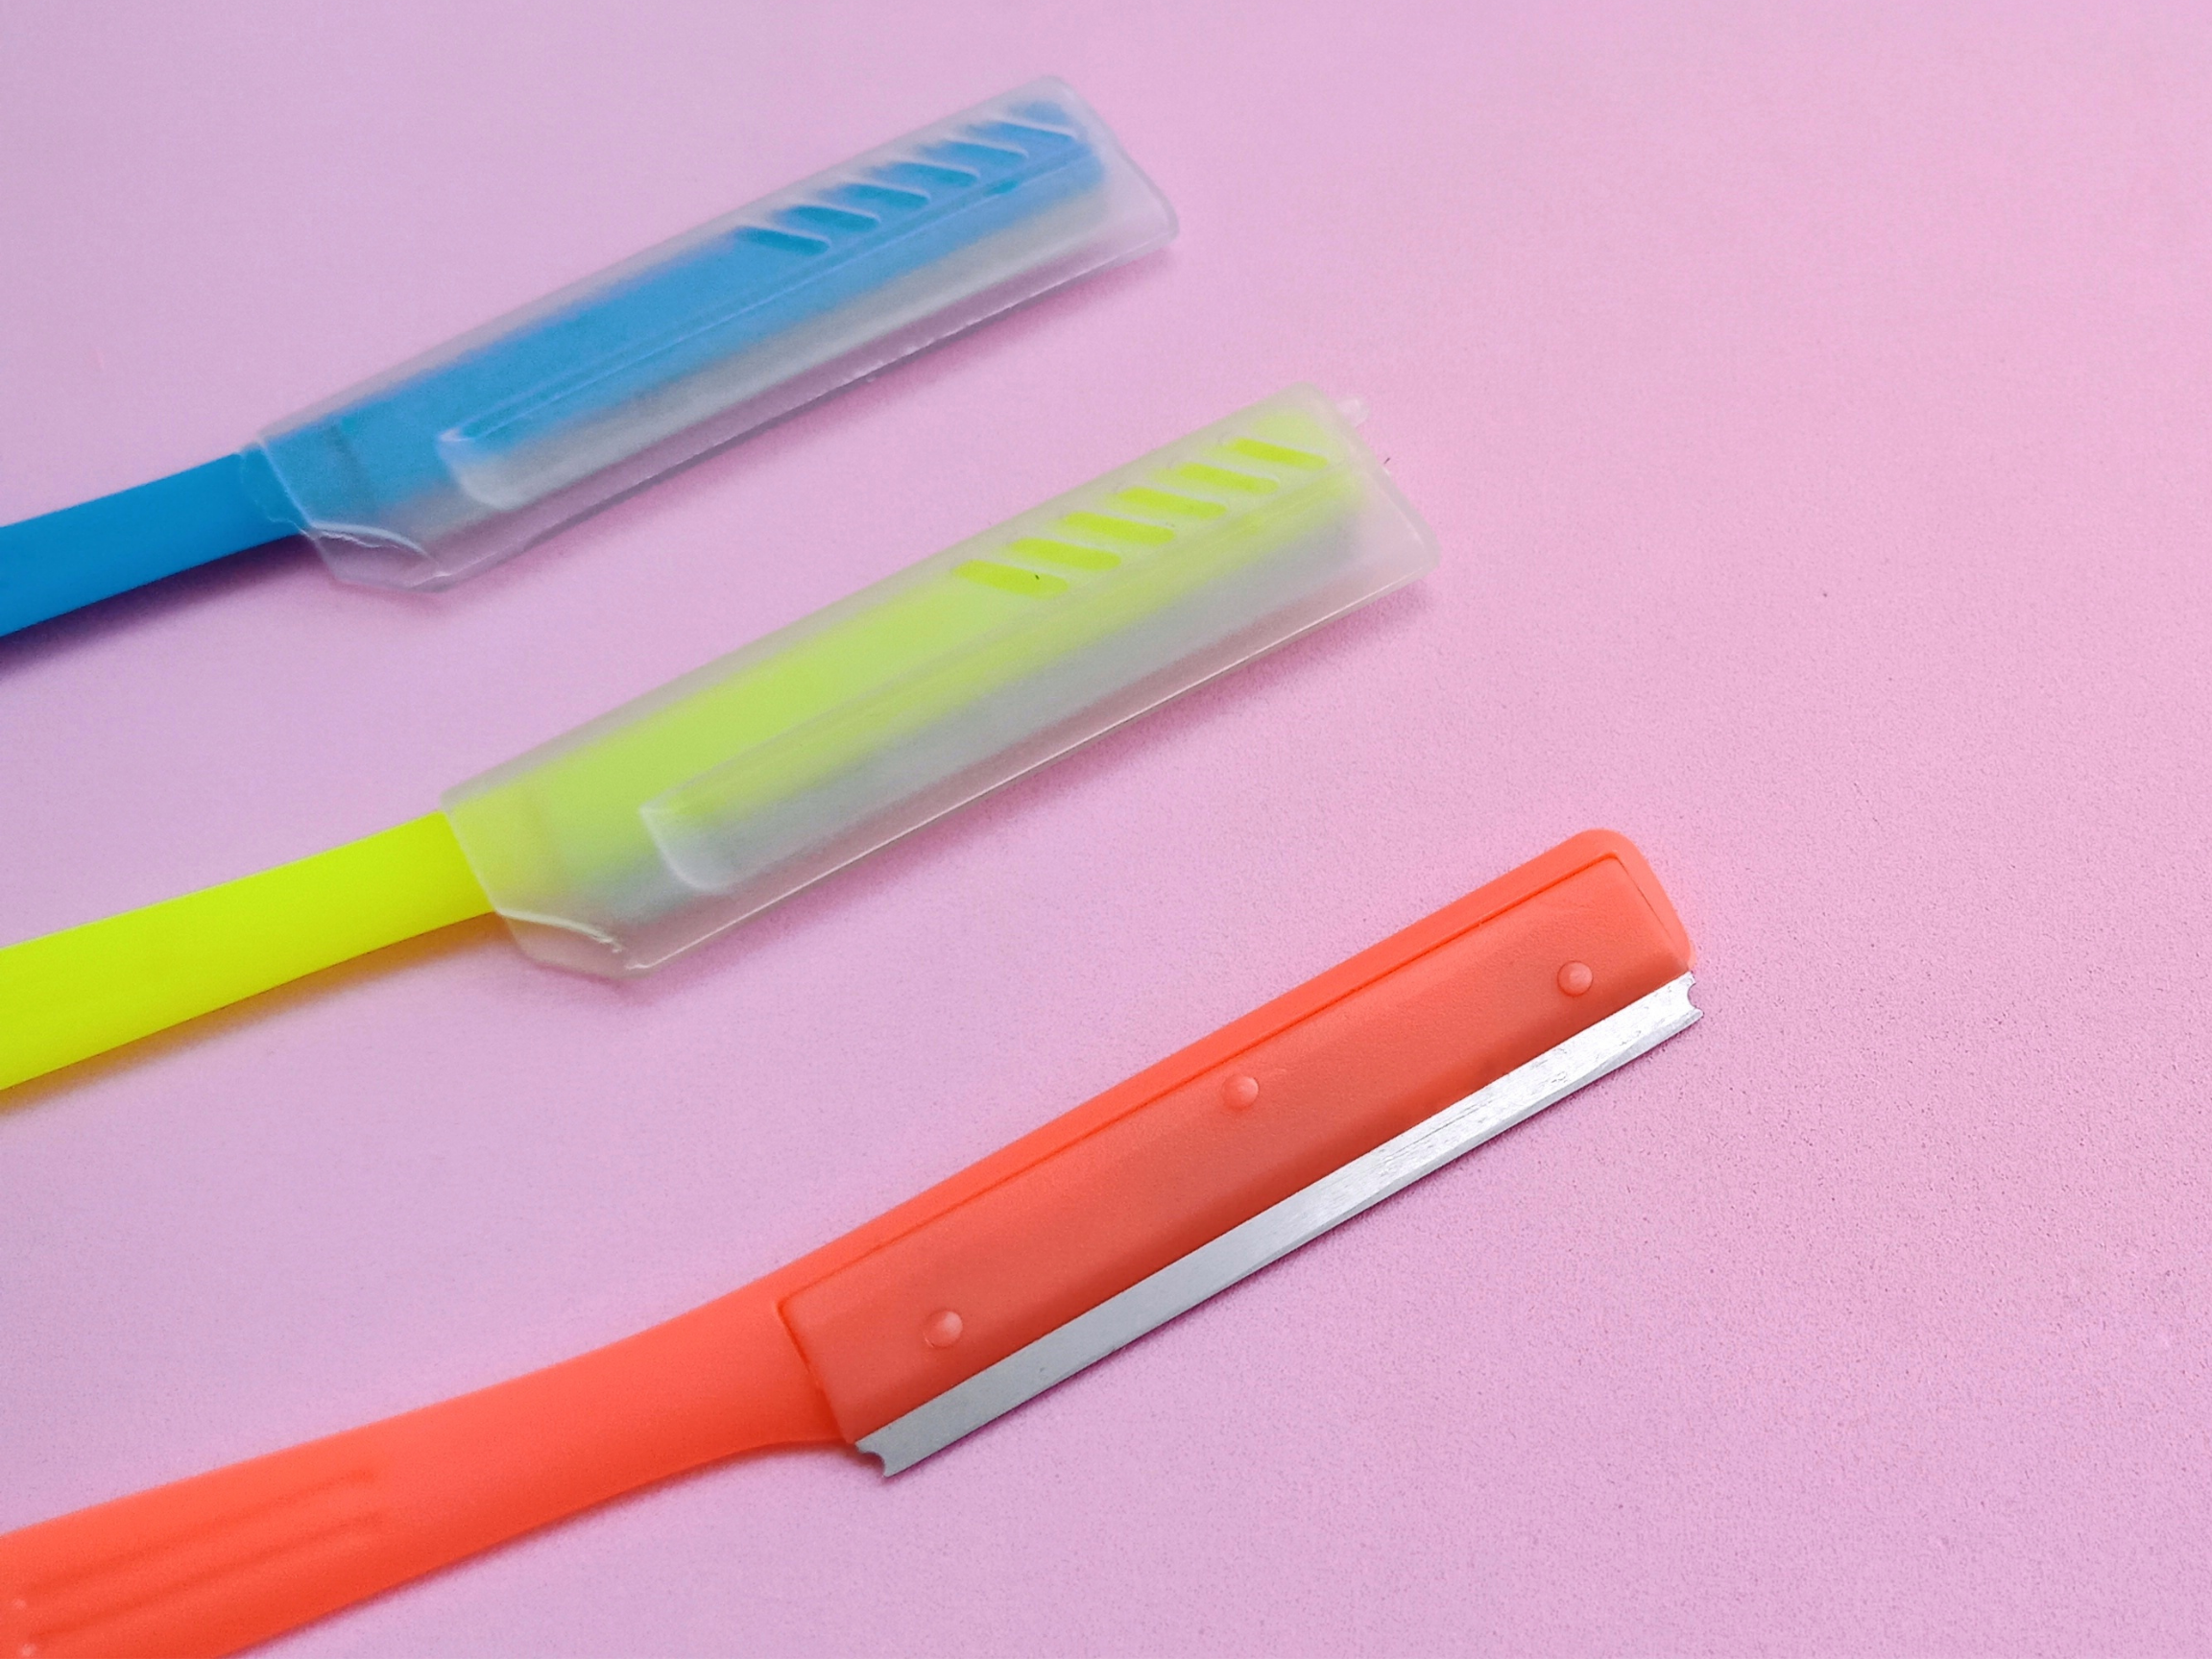 close up of colorful face-shaving razors for women